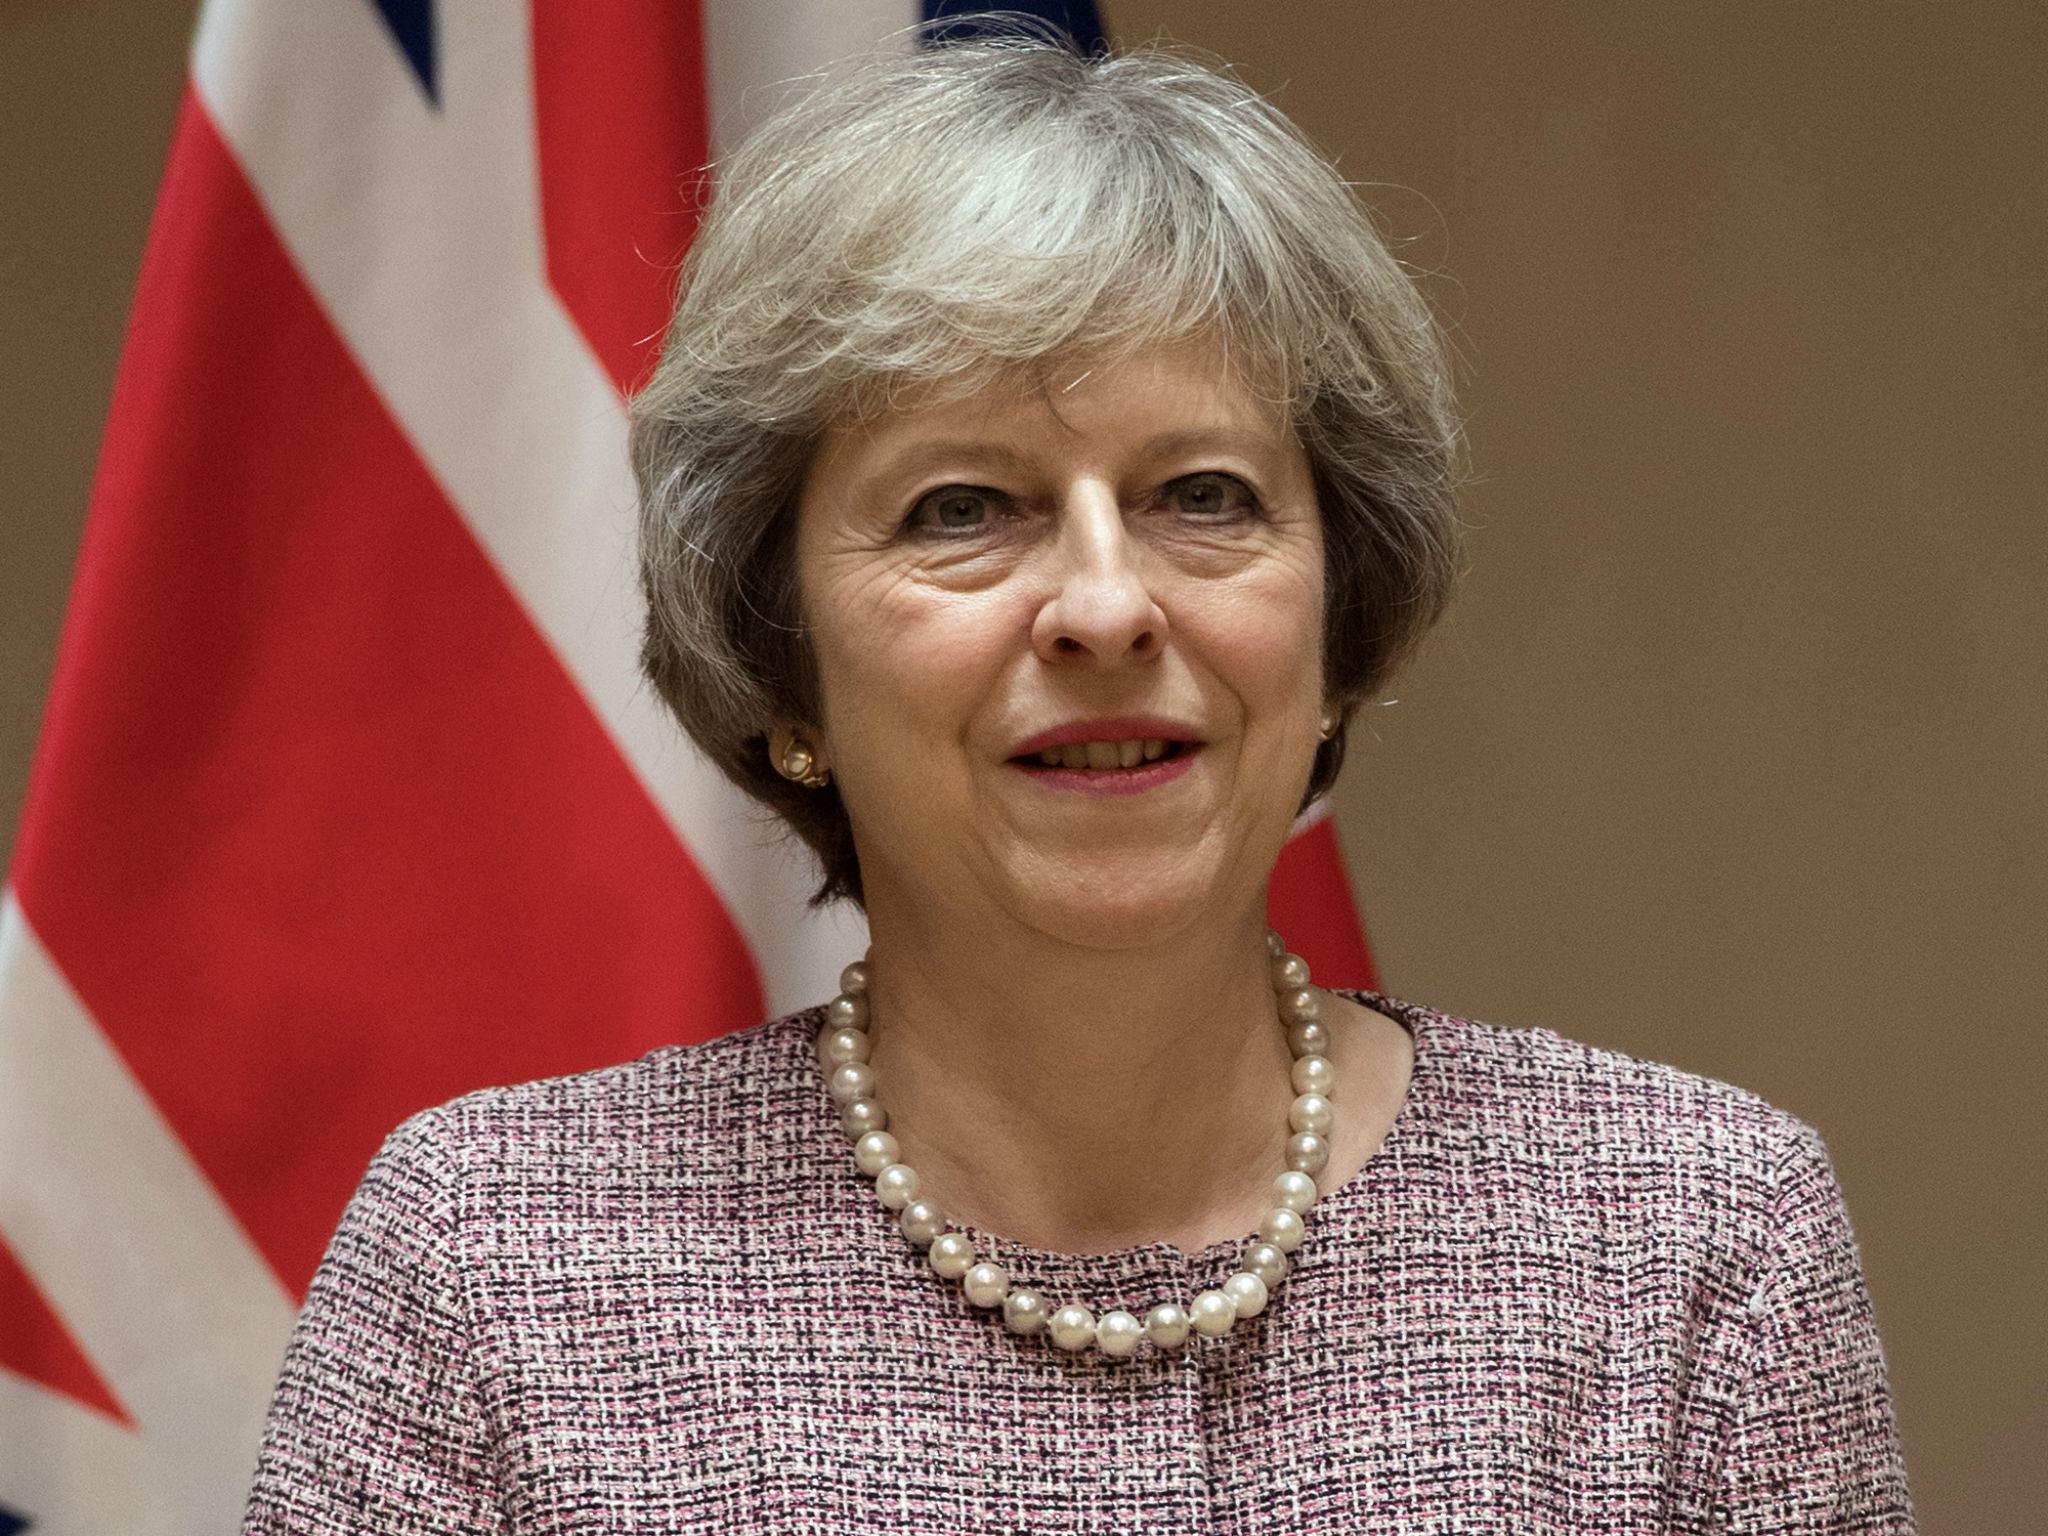 Theresa May has aired her desire to scrap the Human Rights Act many times